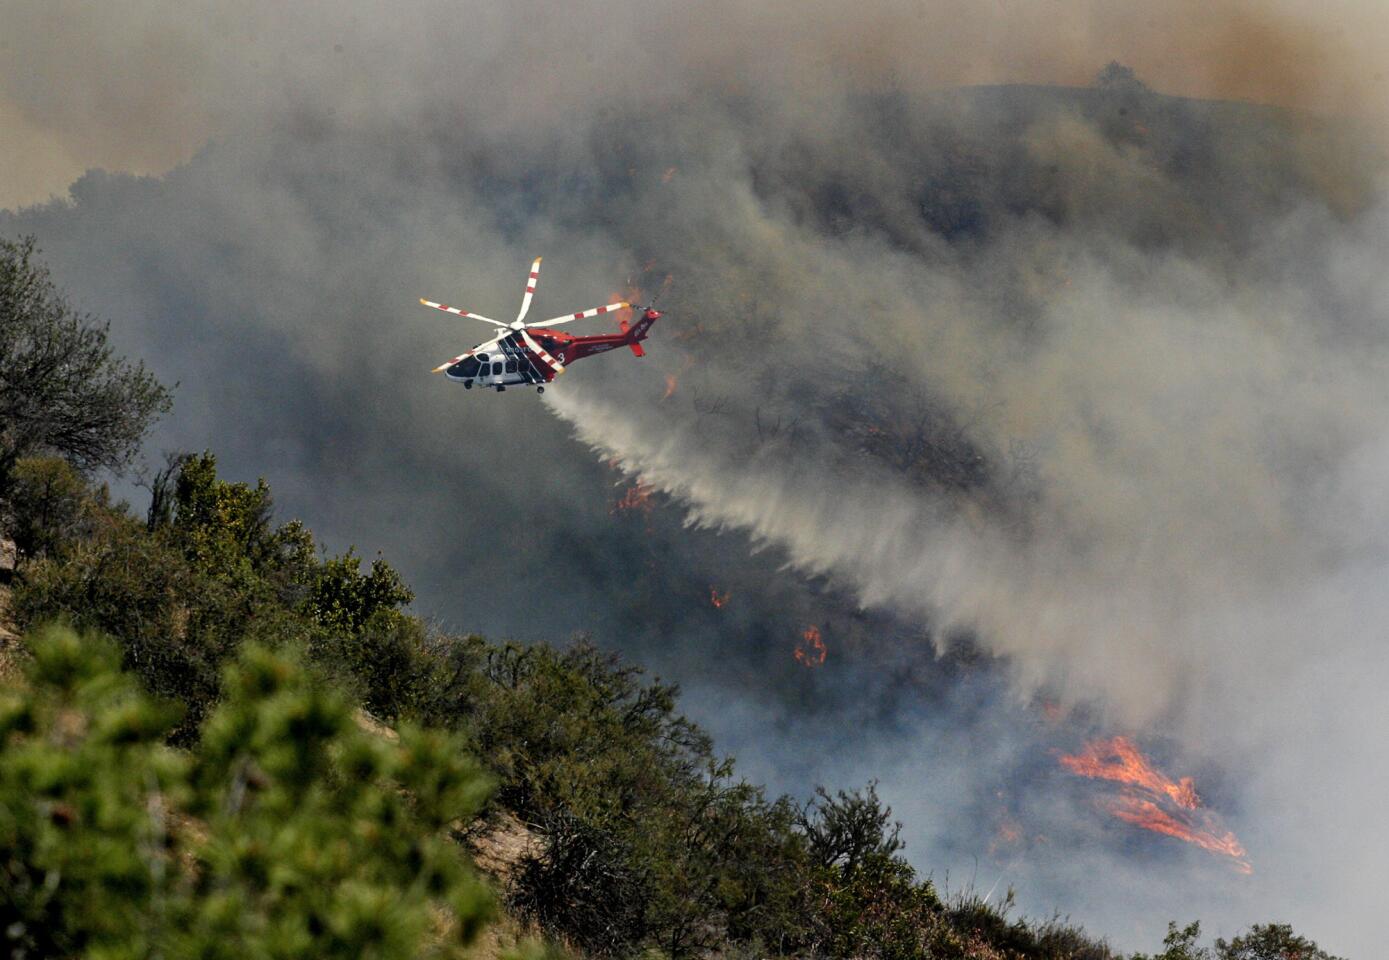 Water is dropped from a helicopter onto a hot spot at a fire in the Glenoaks and Chevy Chase canyons in Glendale on Friday, May 3, 2013. Hundreds of homes were evacuated.